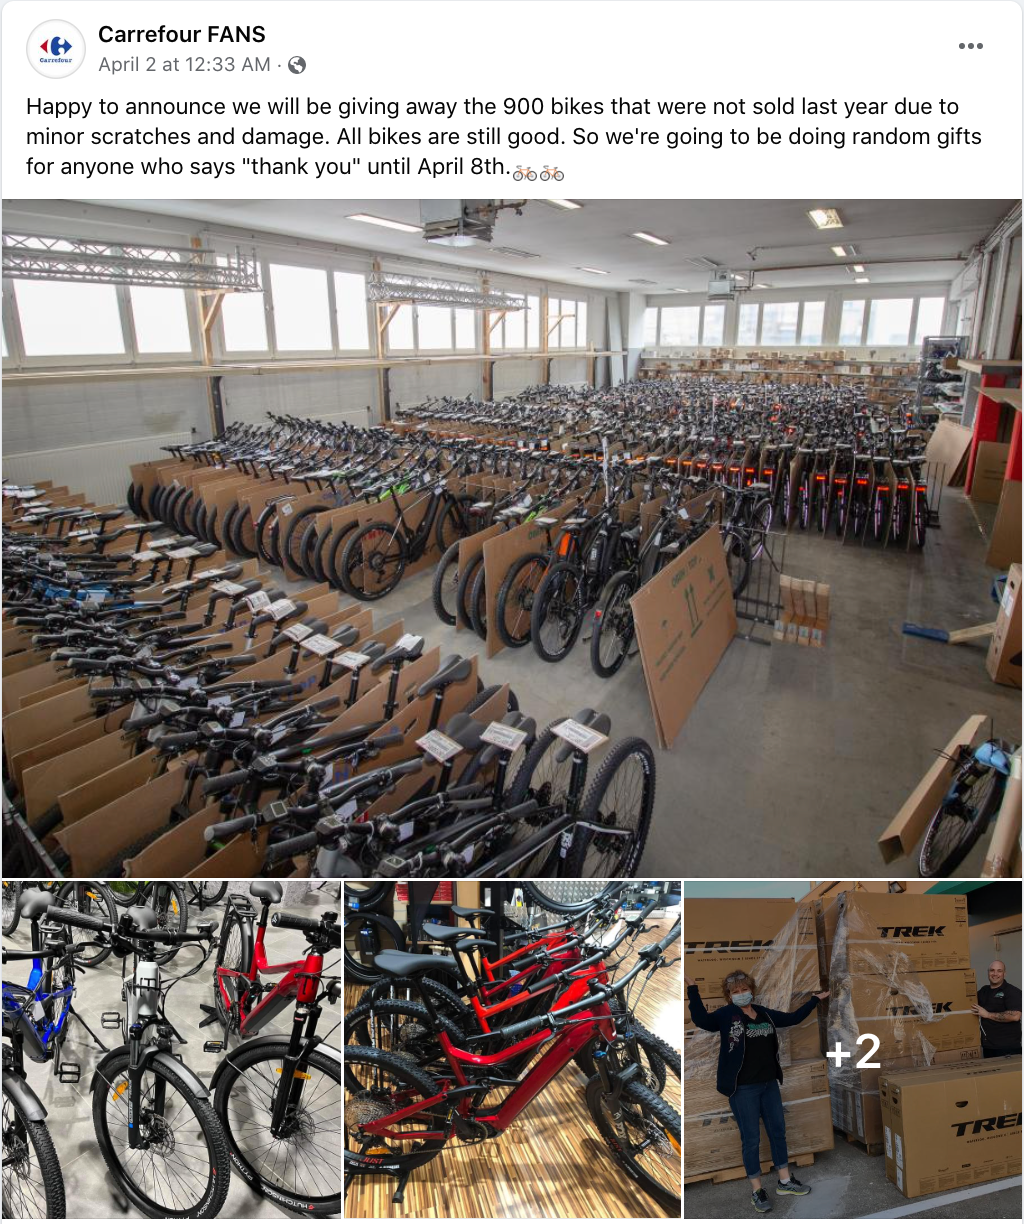 HOAX: Carrefour is not giving away 900 bikes | by PesaCheck | PesaCheck